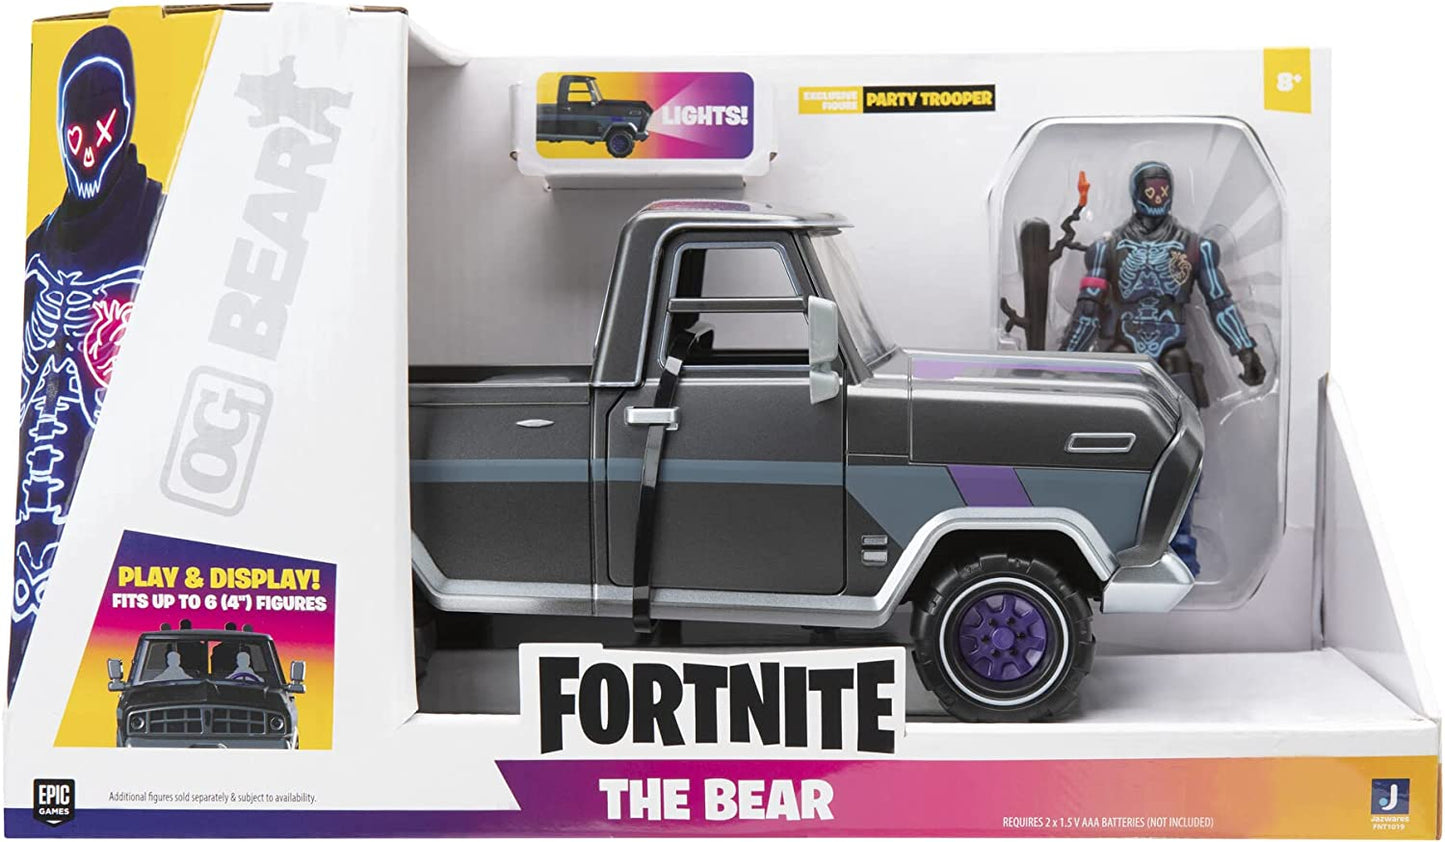 Fortnite the Bear OG Truck with Party Trooper